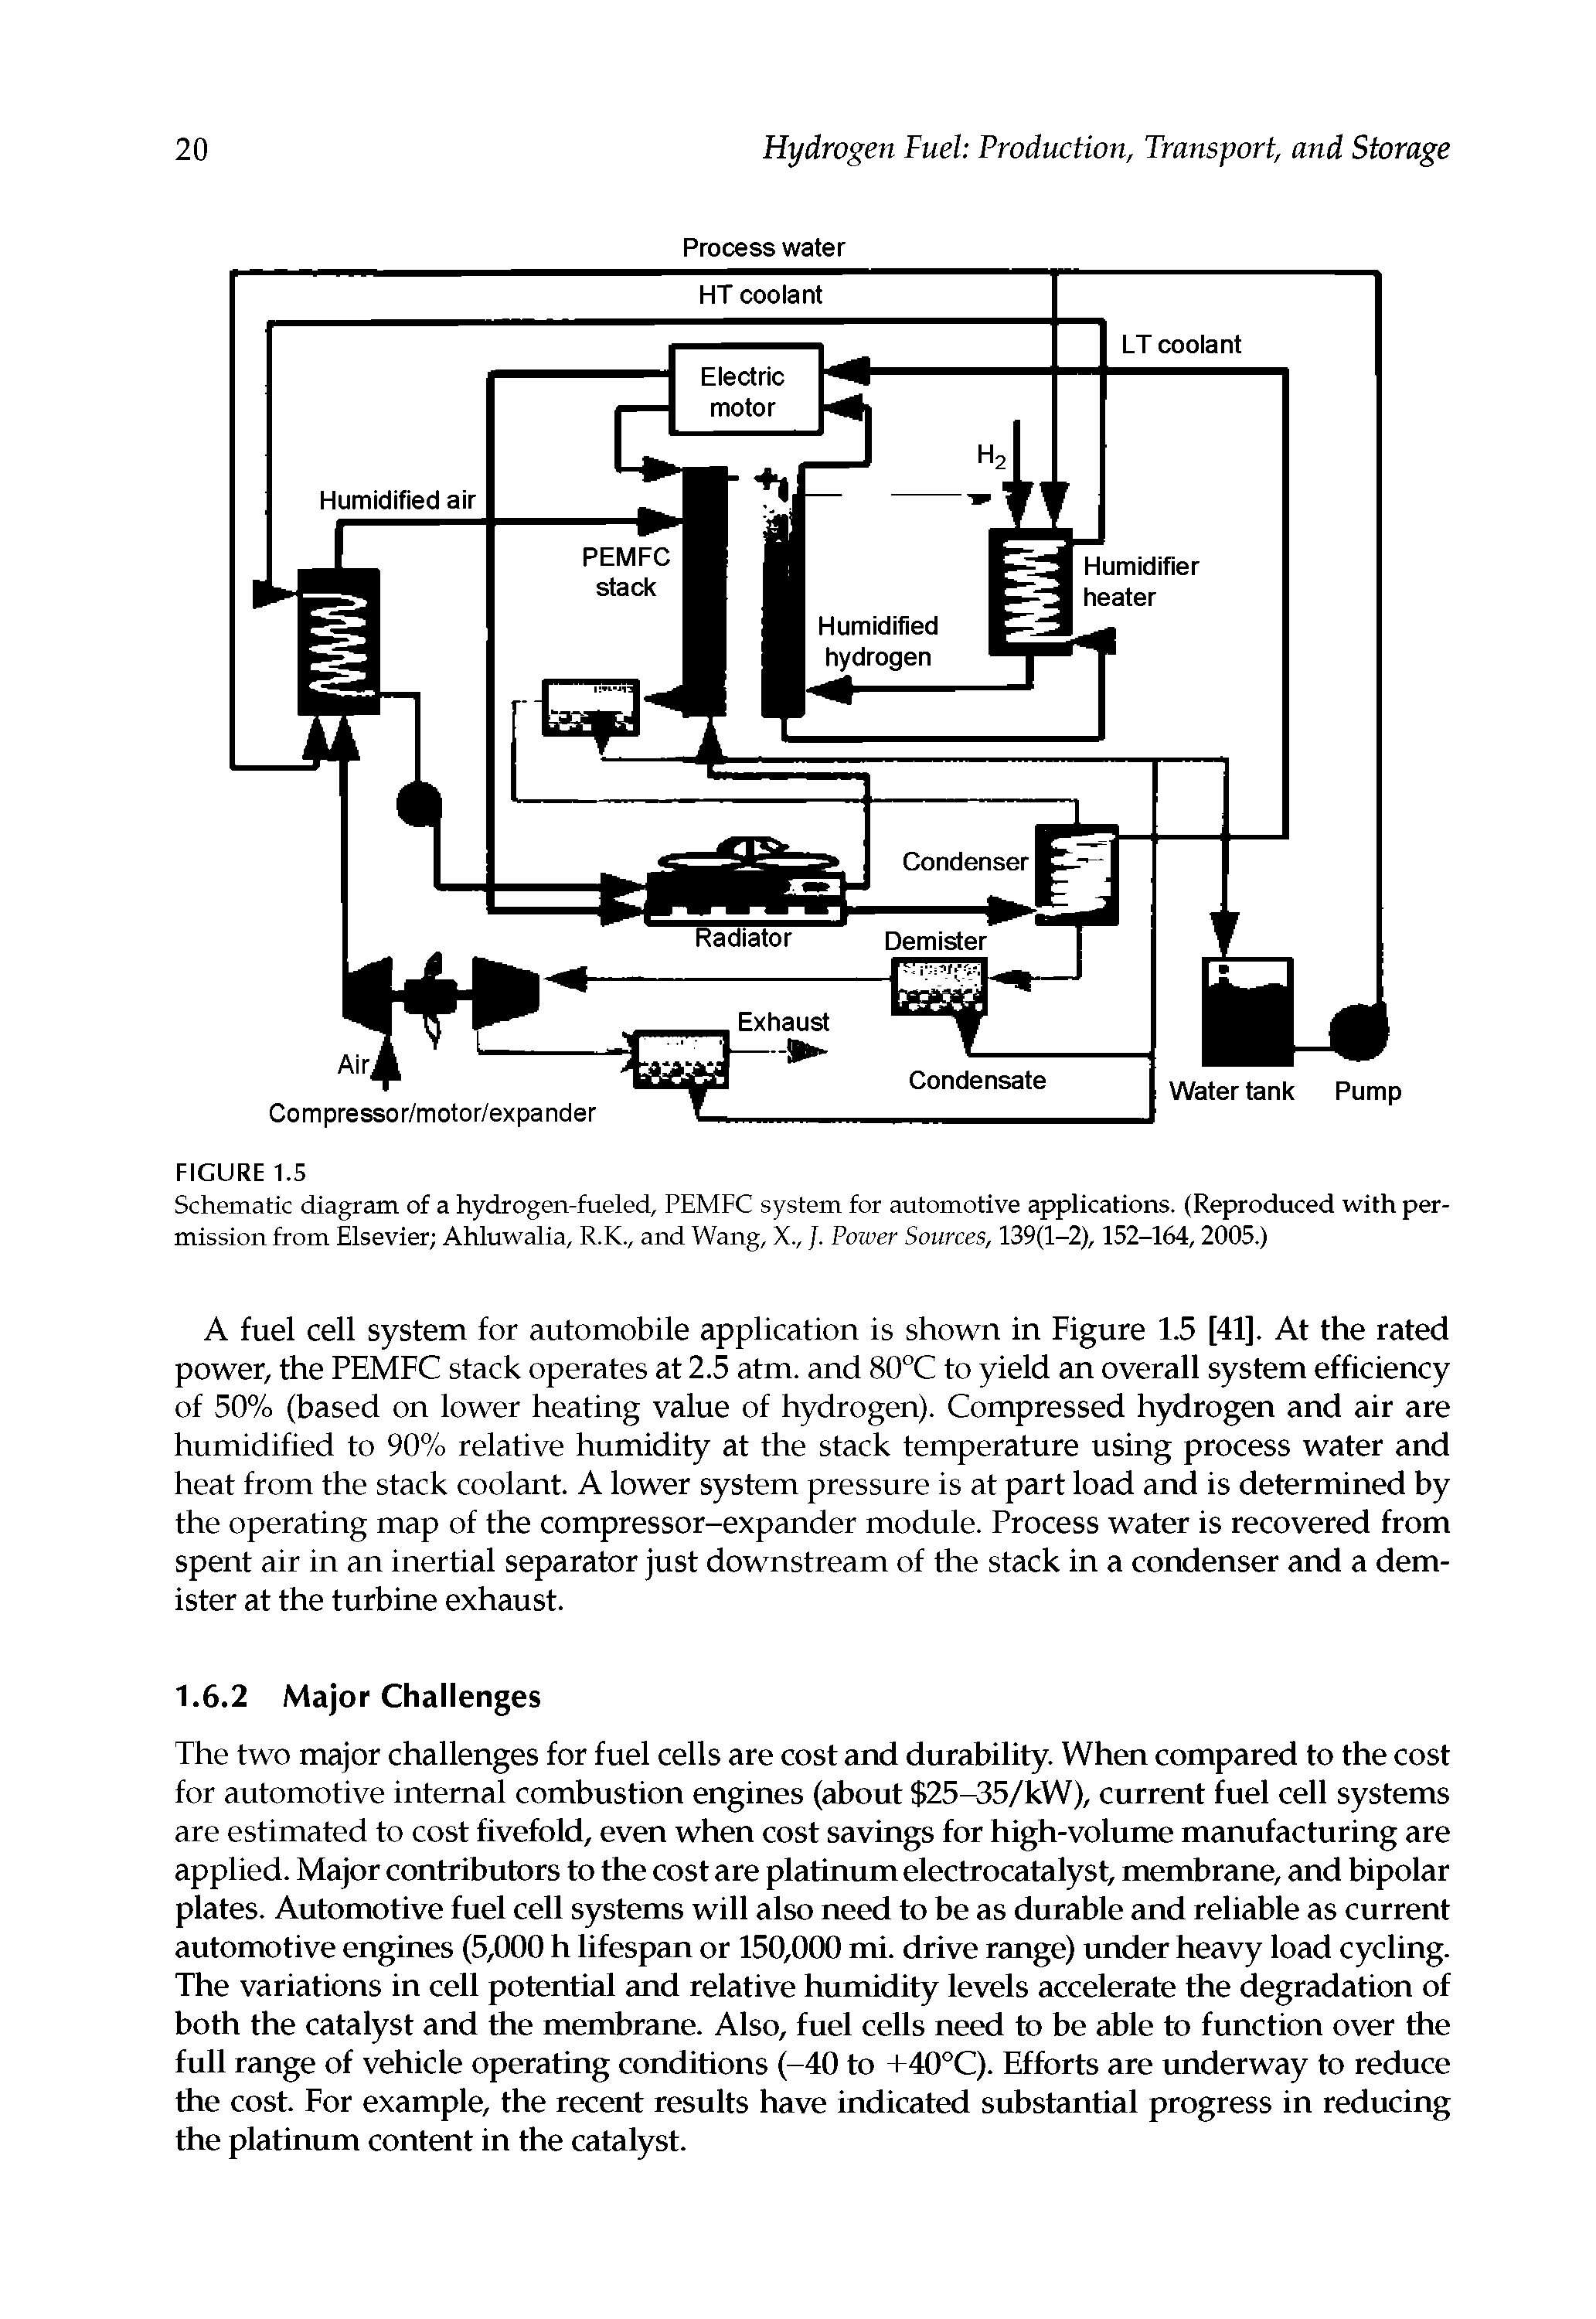 Schematic diagram of a hydrogen-fueled, PEMFC system for automotive applications. (Reproduced with permission from Elsevier Ahluwalia, R.K., and Wang, X., /. Power Sources, 139(1-2), 152-164, 2005.)...